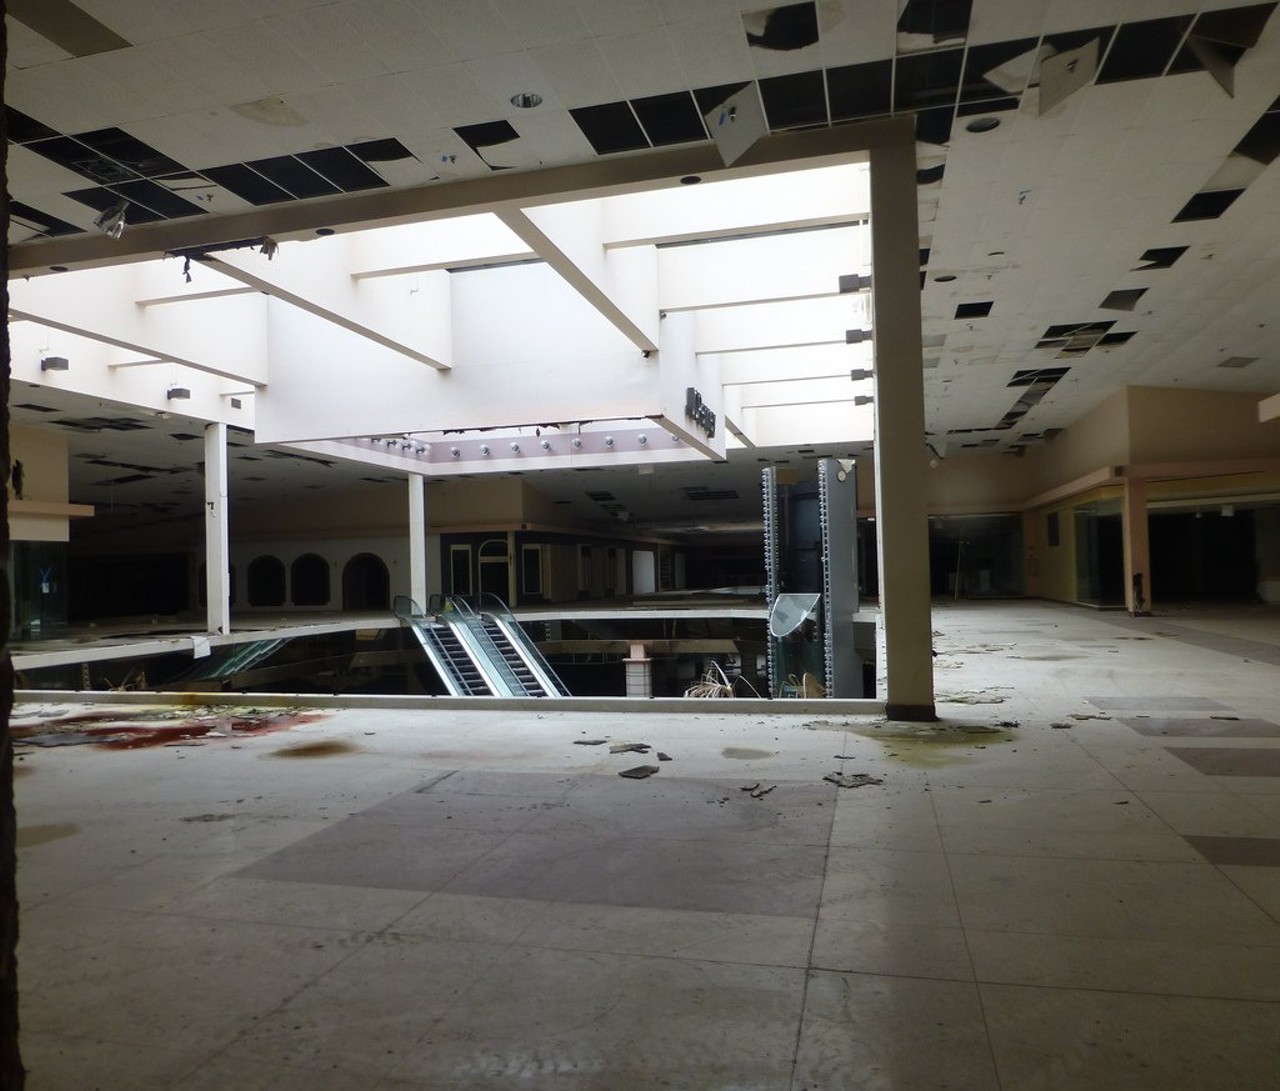 Mall interior as visible from JCP.